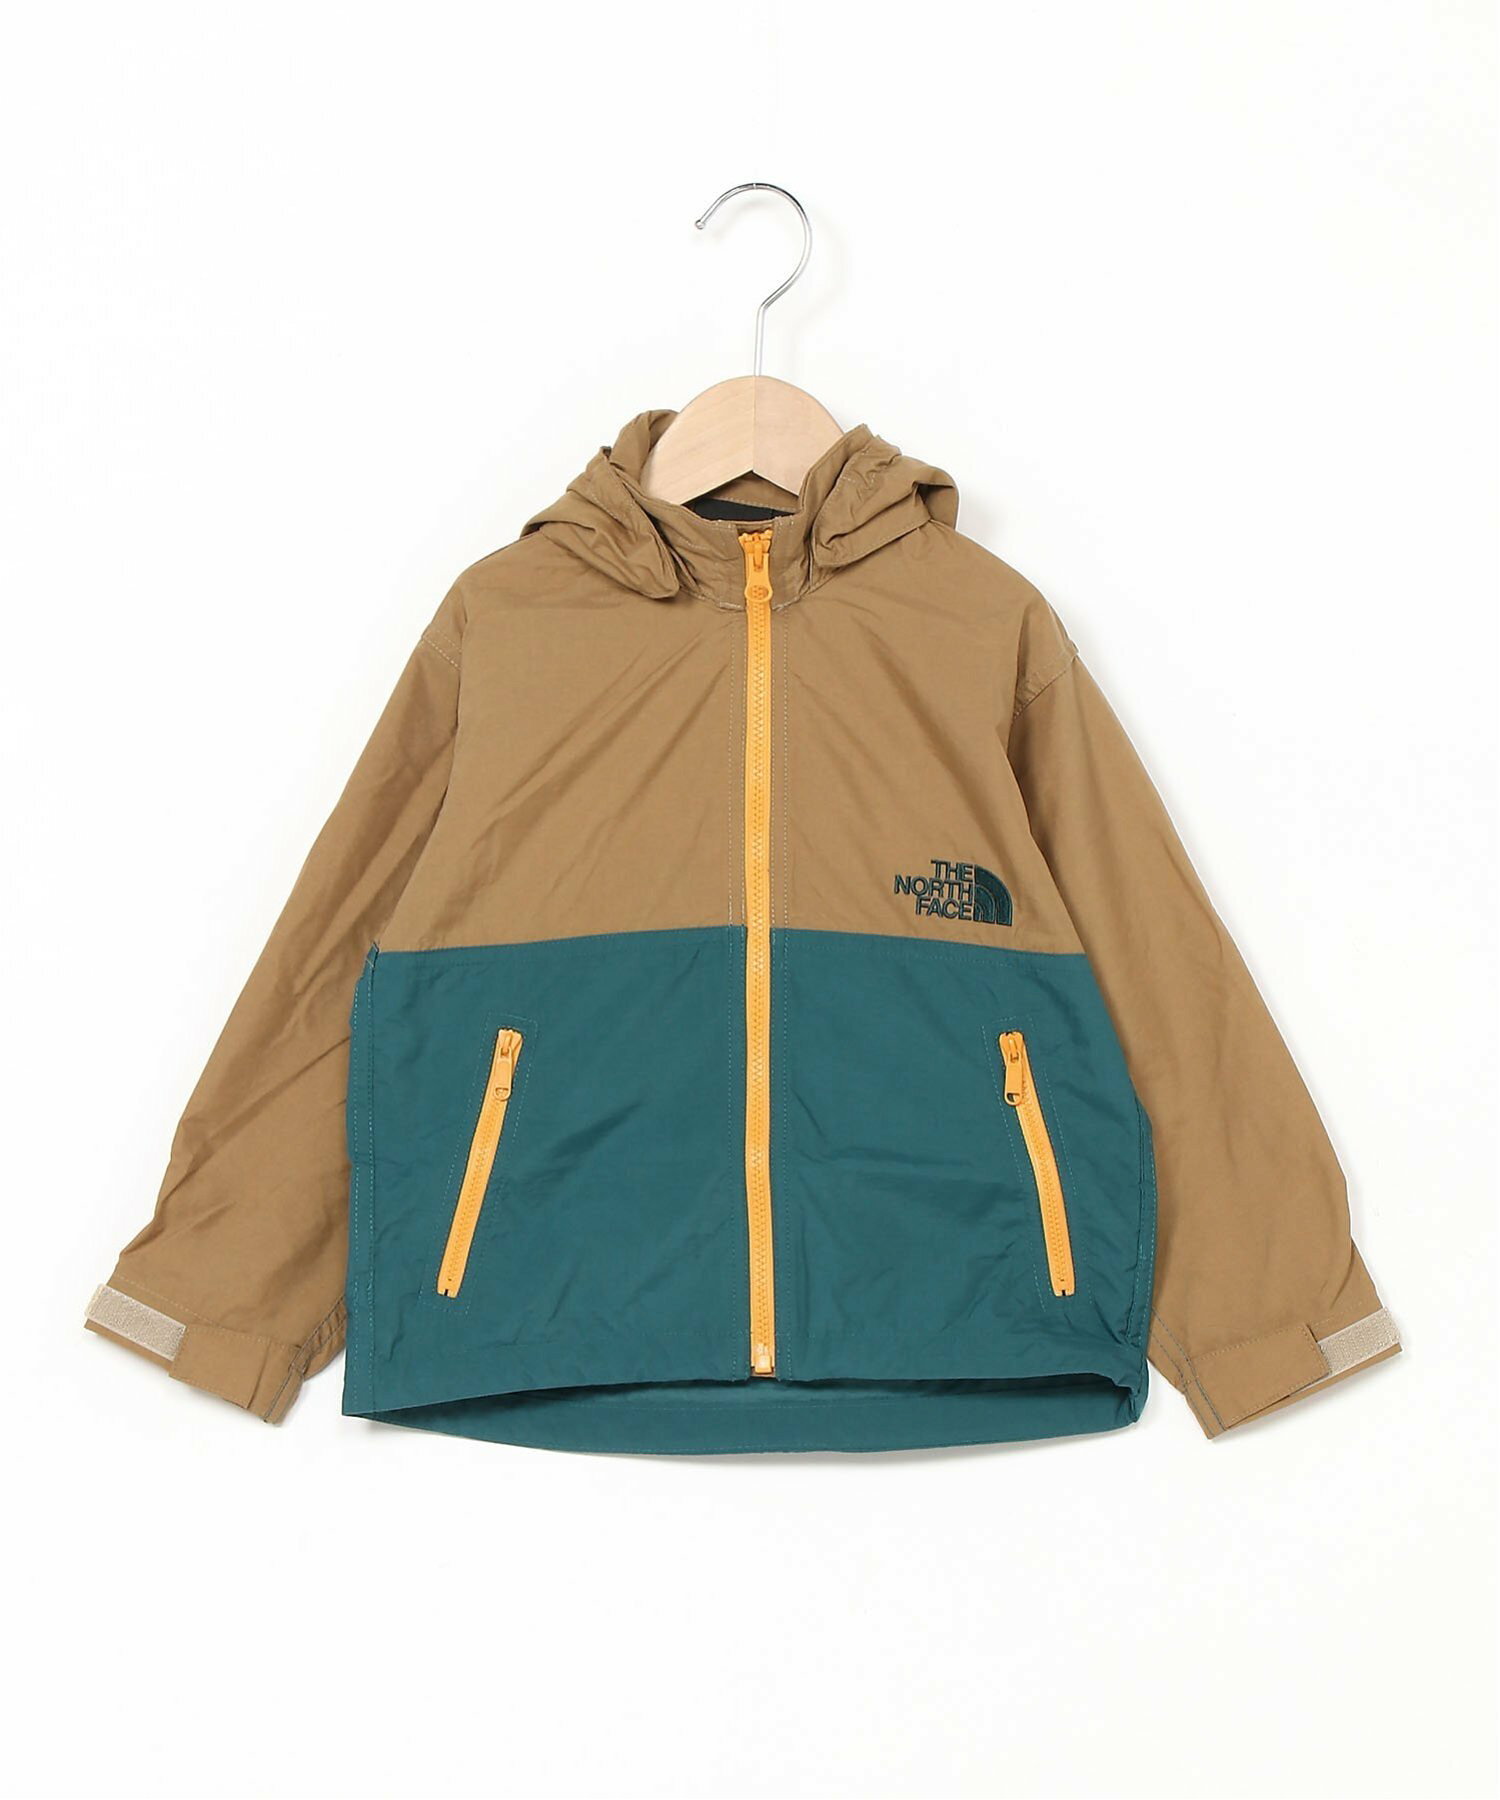 THE NORTH FACE/NPJ72310 コンパクトジャケット